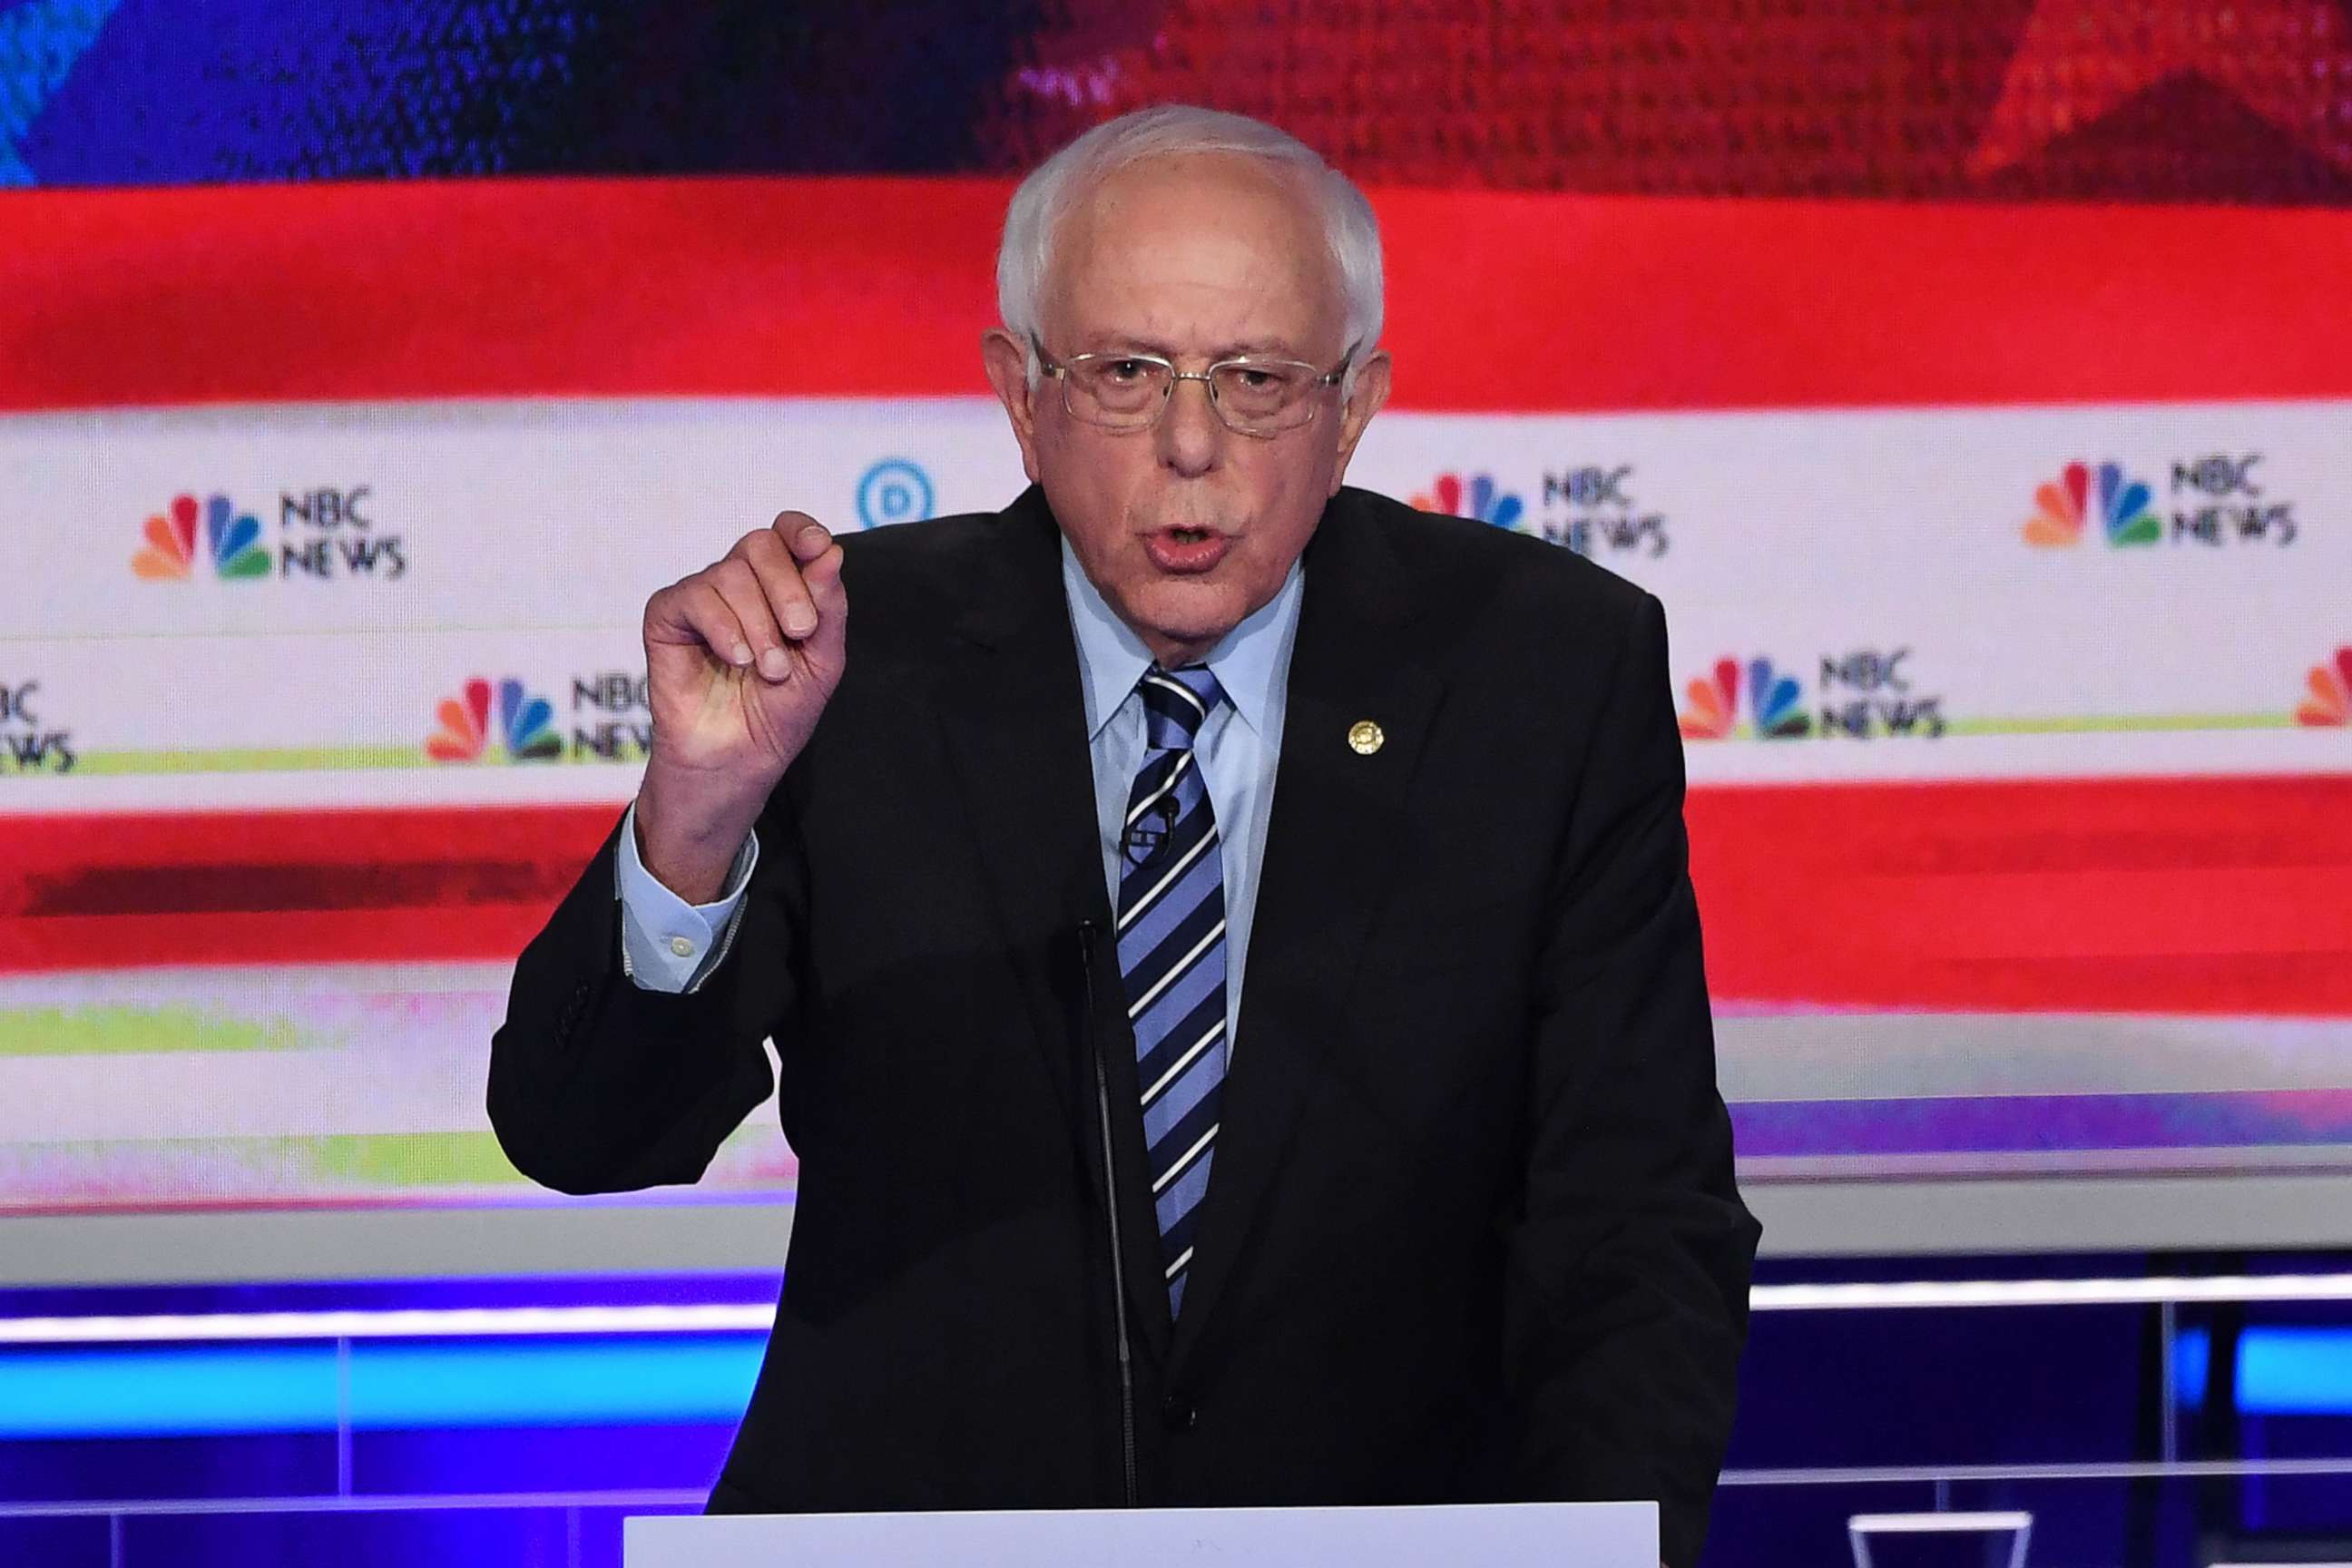 PHOTO: Bernie Sanders participates in the second night of the first 2020 democratic presidential debate at the Adrienne Arsht Center for the Performing Arts in Miami, June 27, 2019.